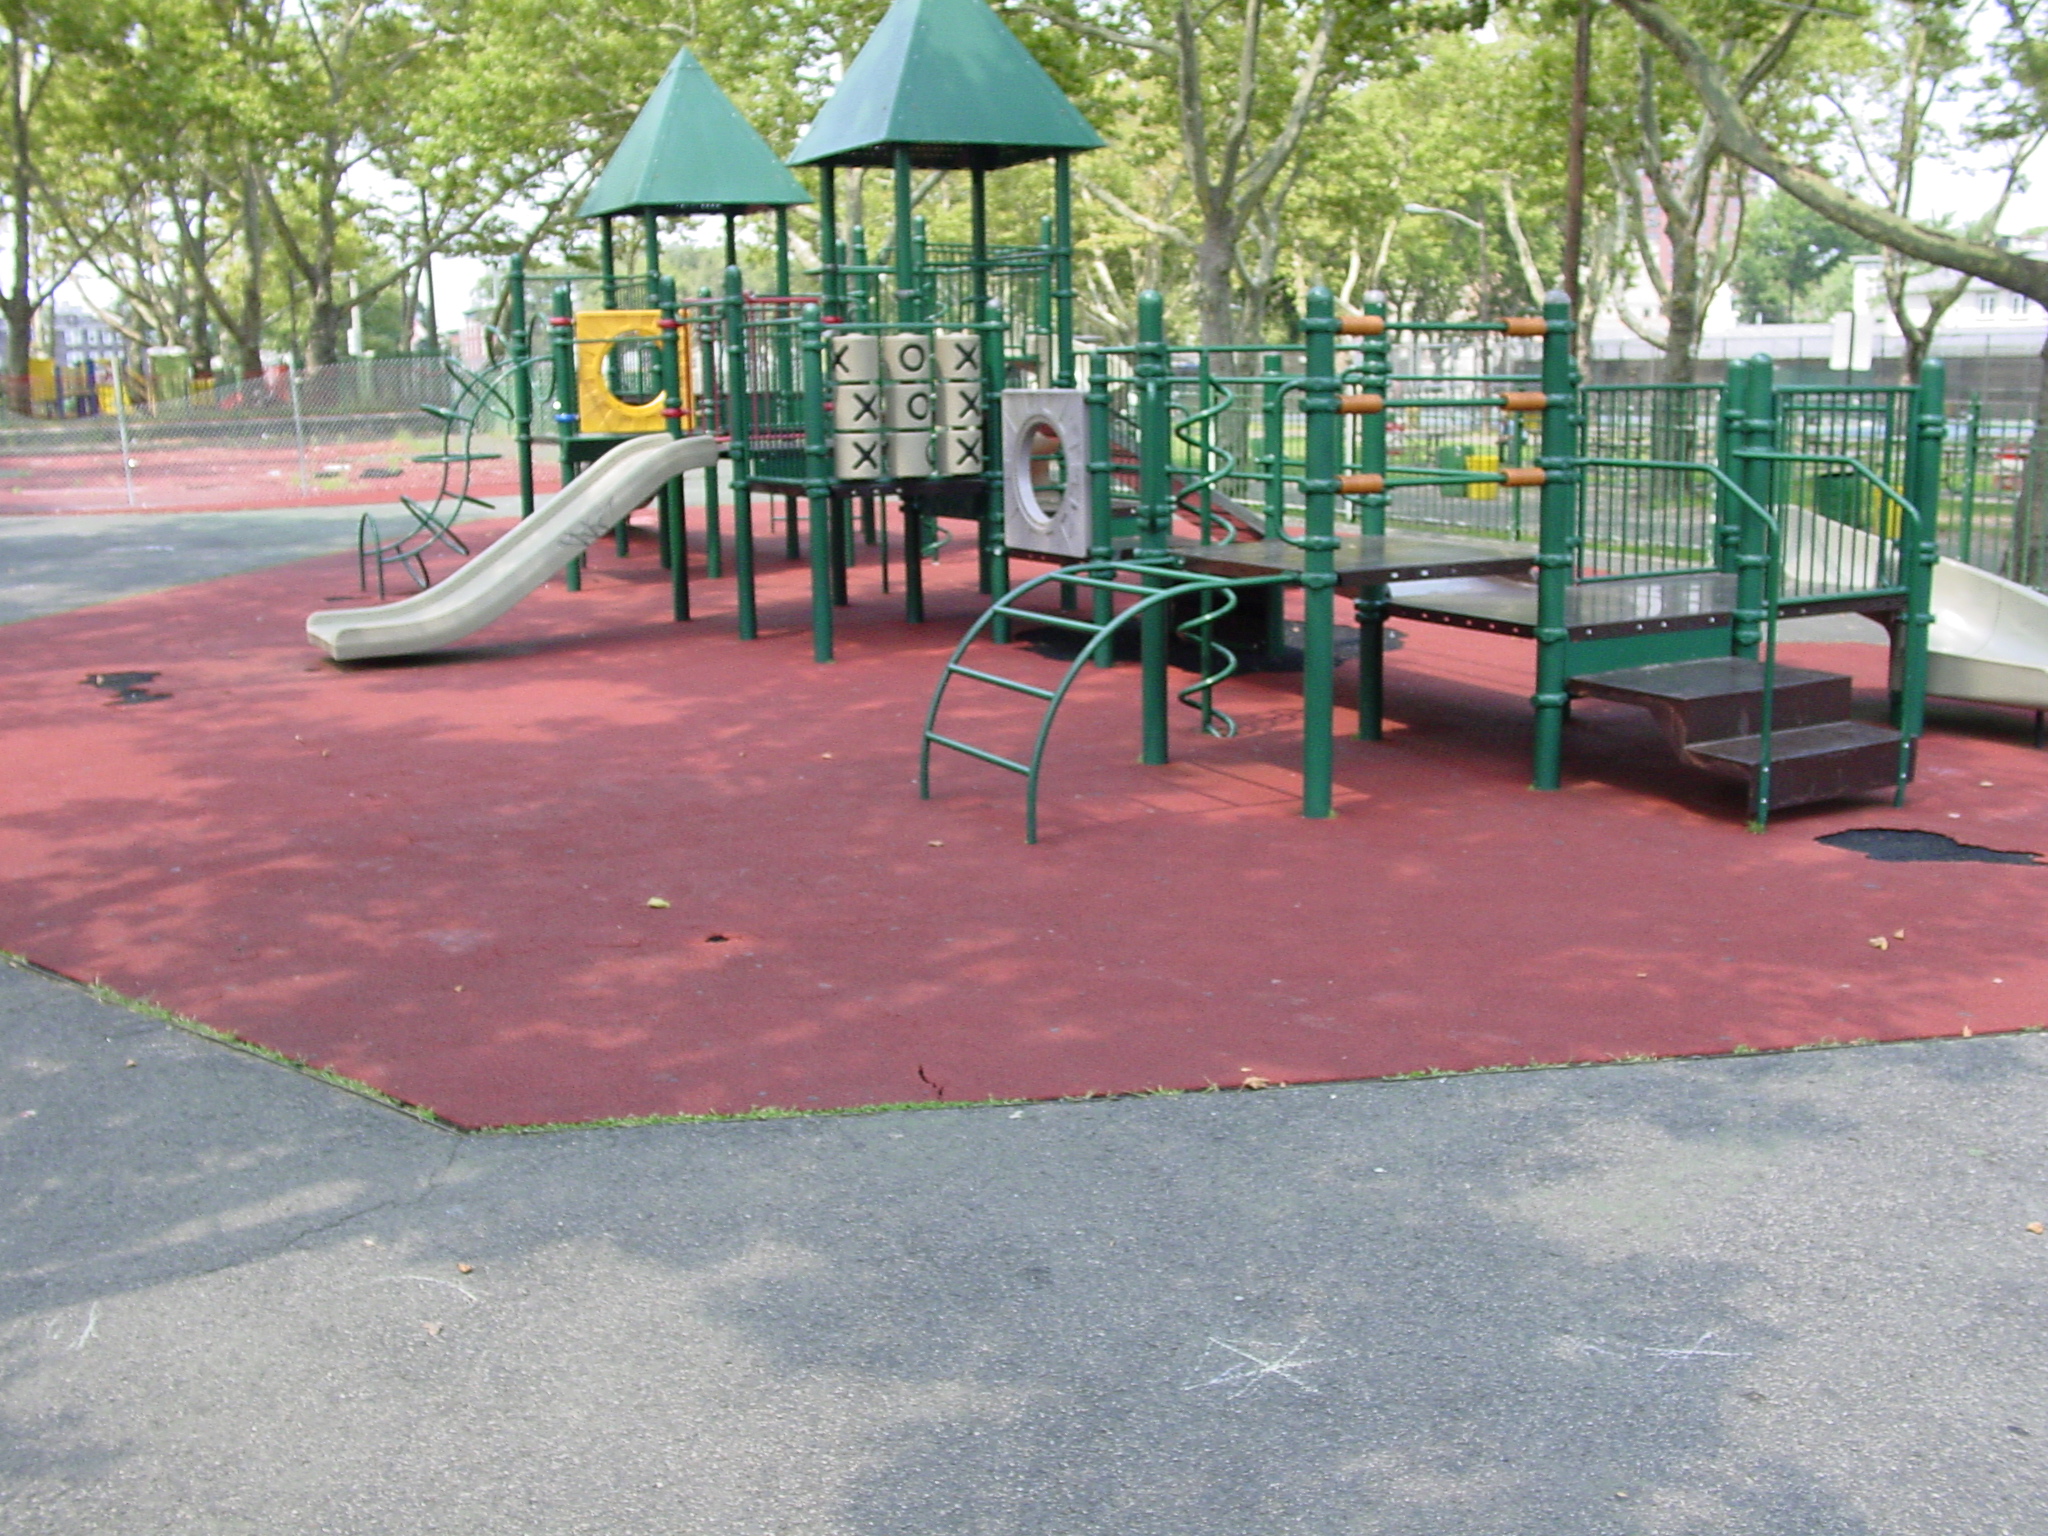 Large Public Park with Multiple Playgrounds Using Designs i